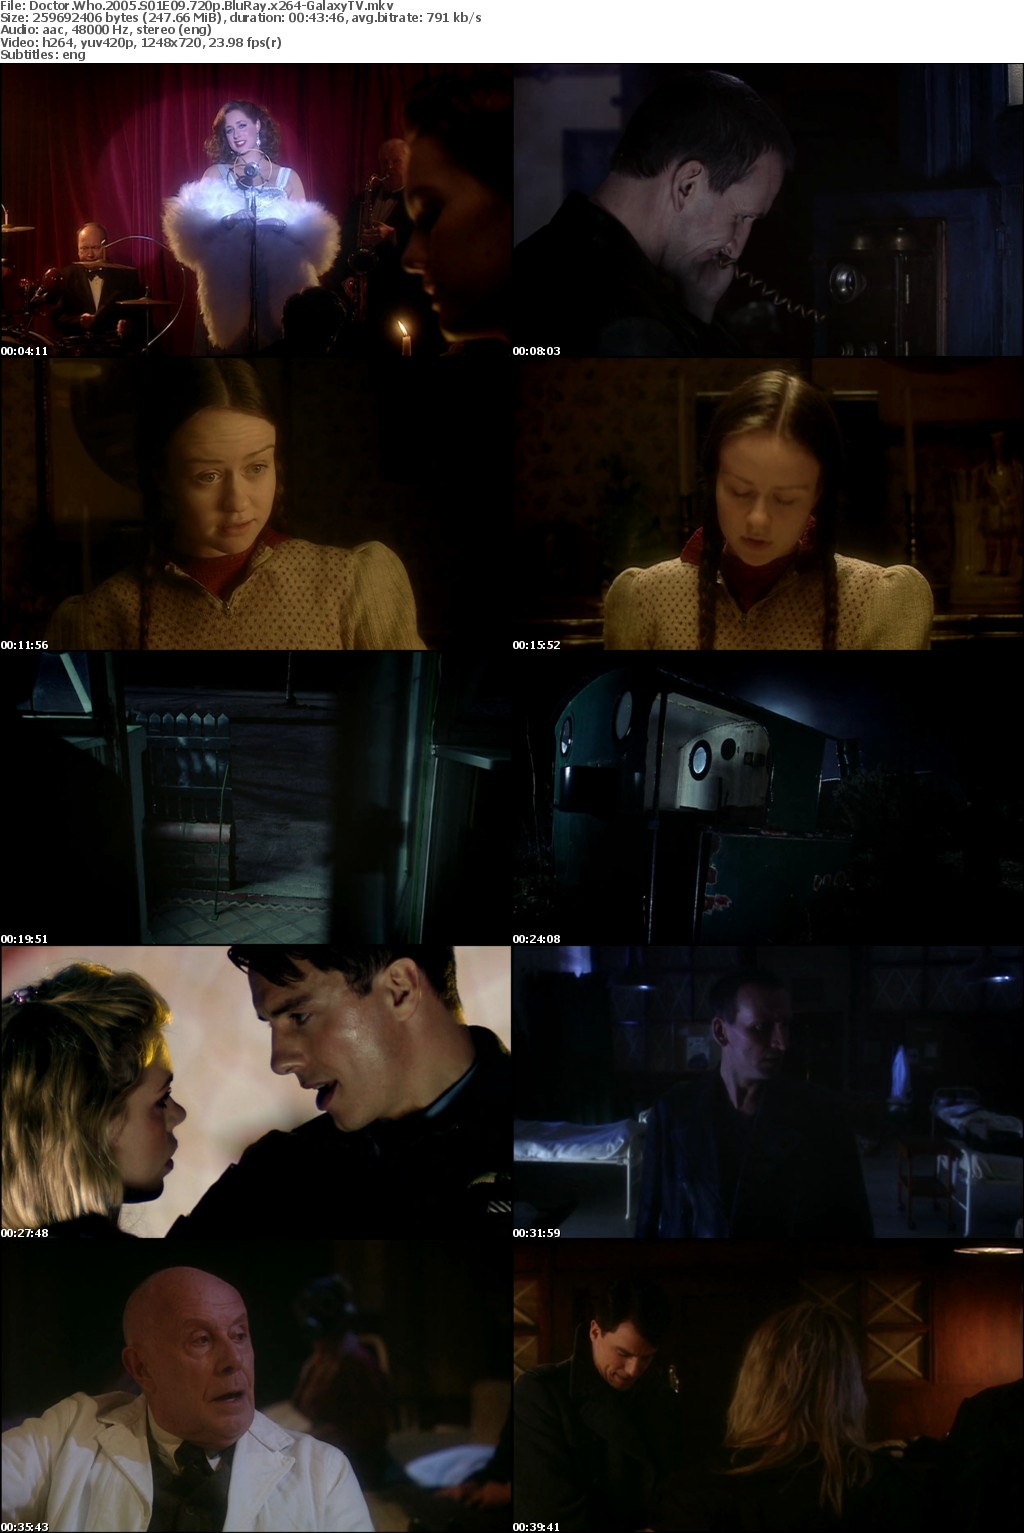 Doctor Who 2005 S01 COMPLETE 720p BluRay x264-GalaxyTV